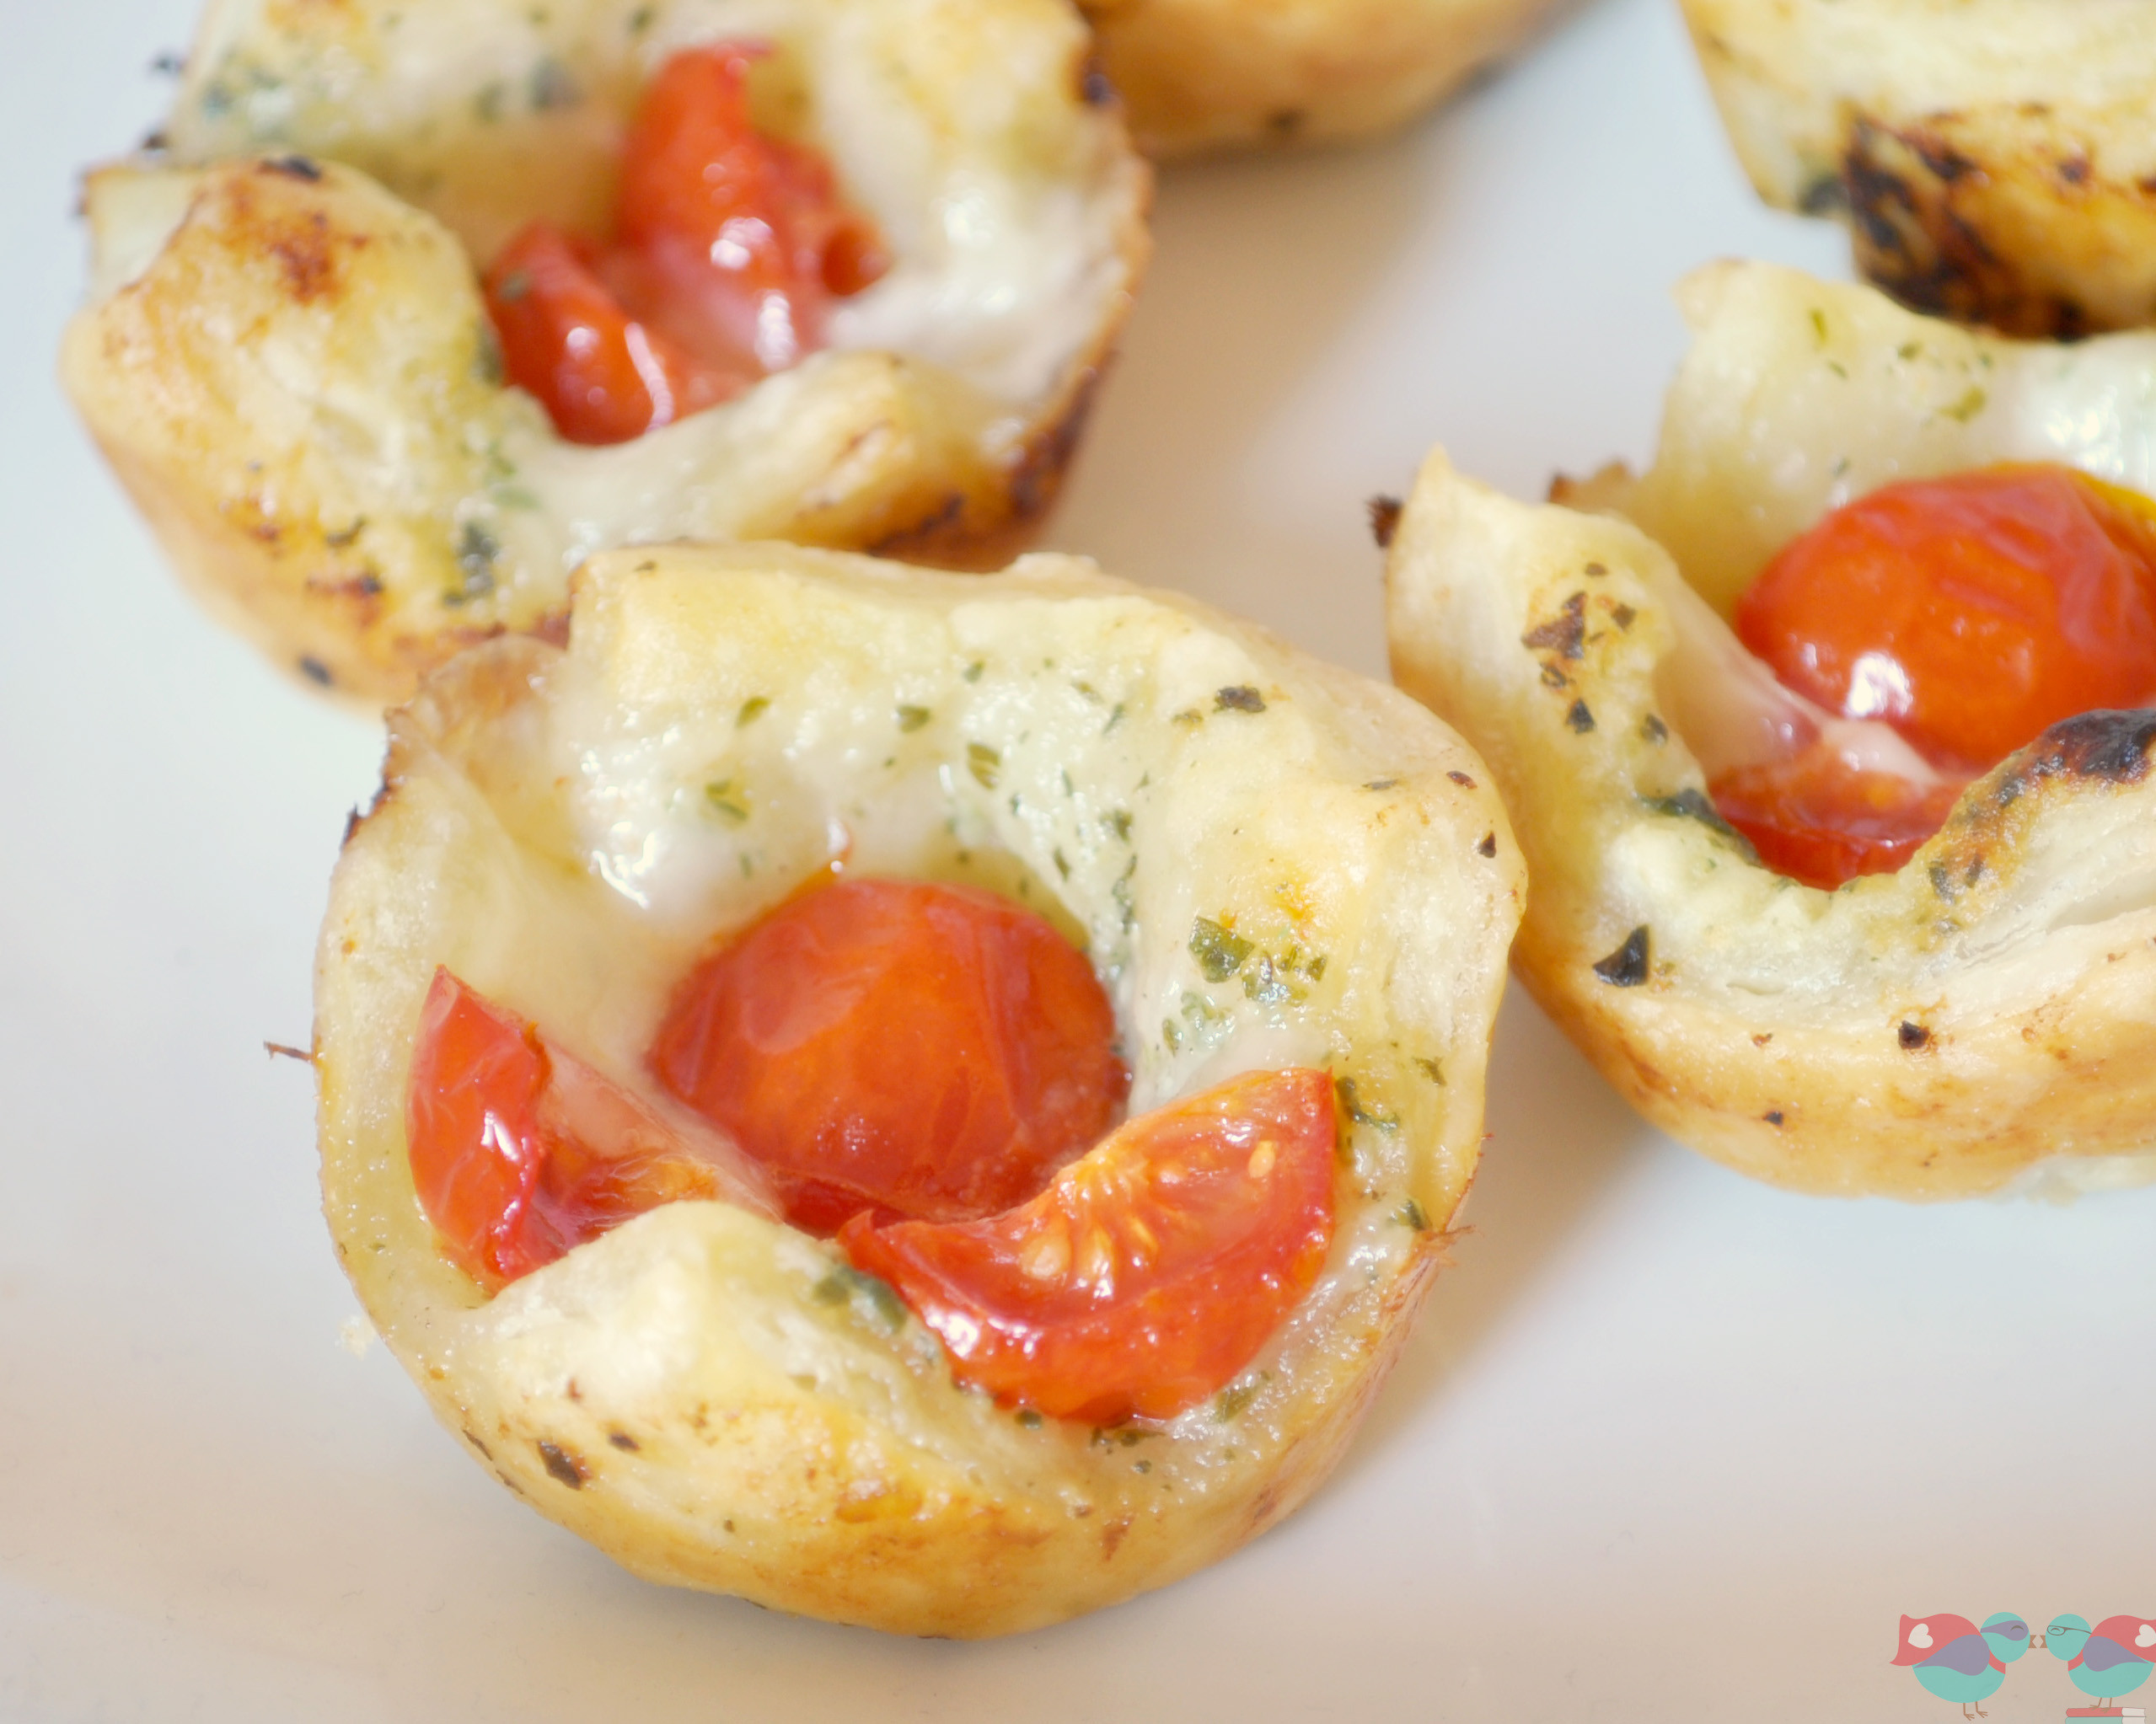 Puff Pastry Cup Appetizers
 Mini Caprese Cups The Perfect Bite Size Appetizer The